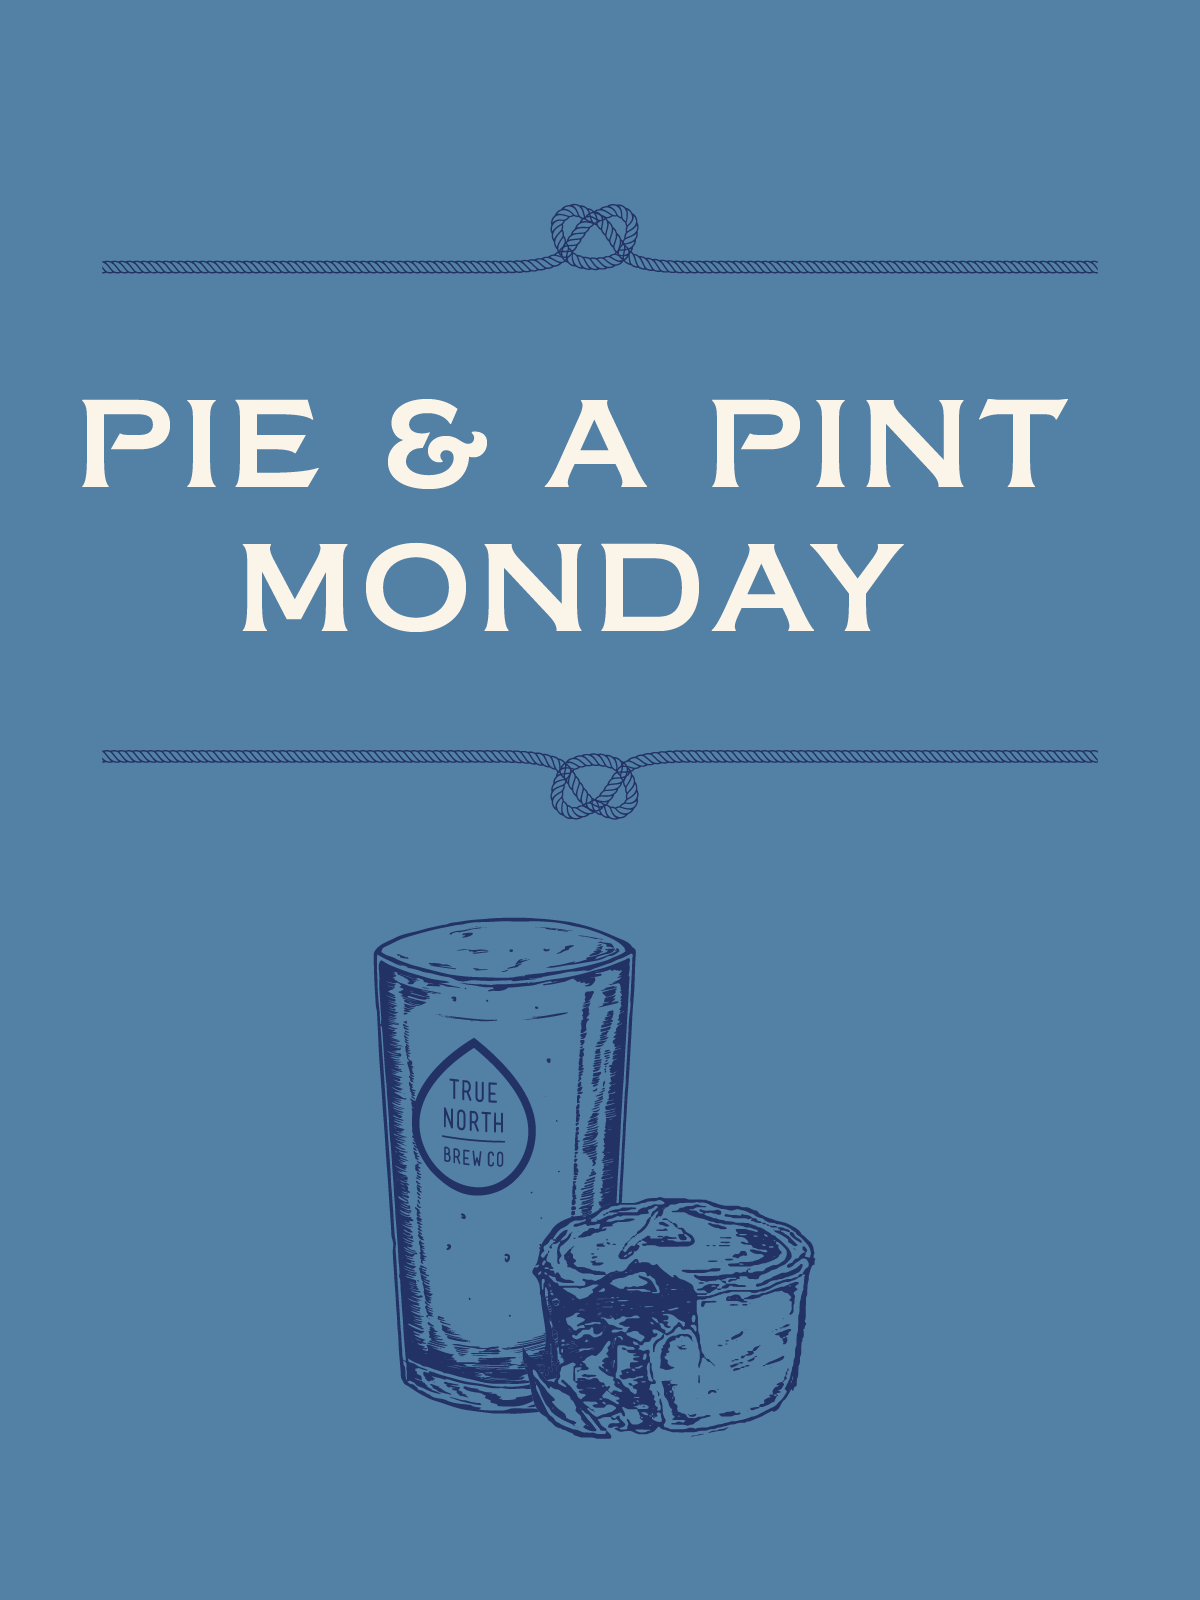 CA Pie and a pint Monday